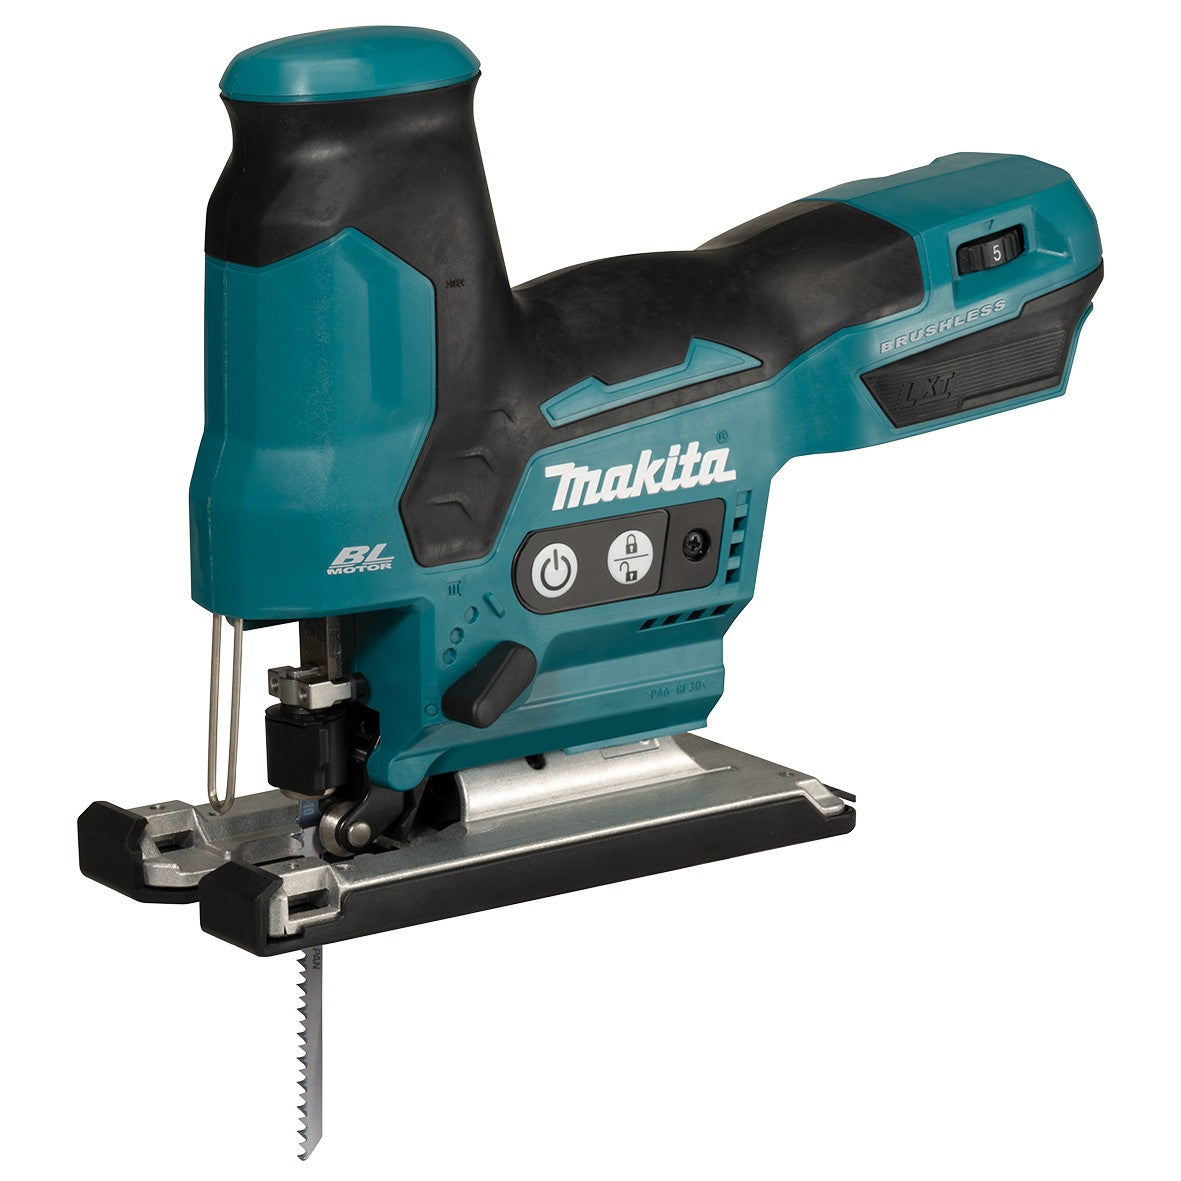 18V Brushless Compact Barrel Handle Jigsaw Bare (Tool Only) DJV185Z by Makita